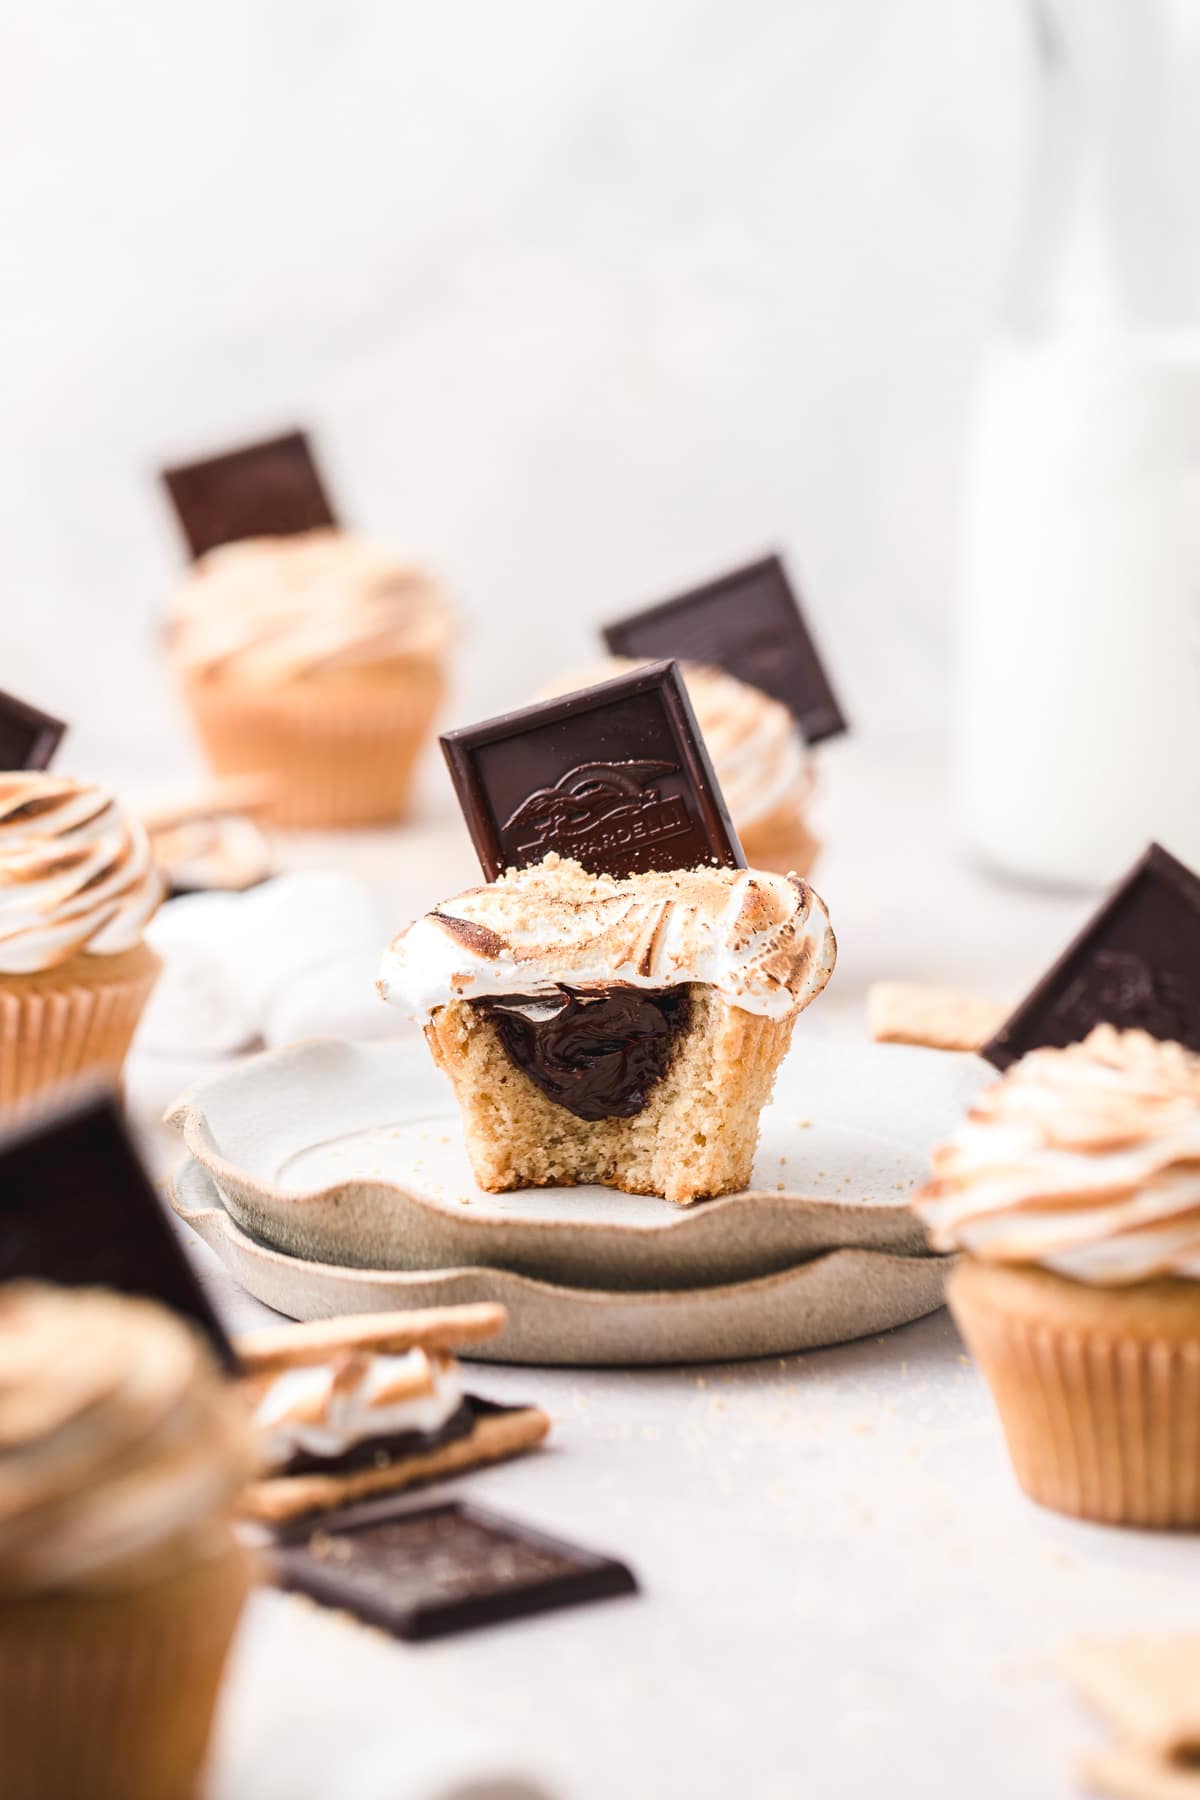 smore's cupcakes filled with chocolate and topped with toasted marshmallow.